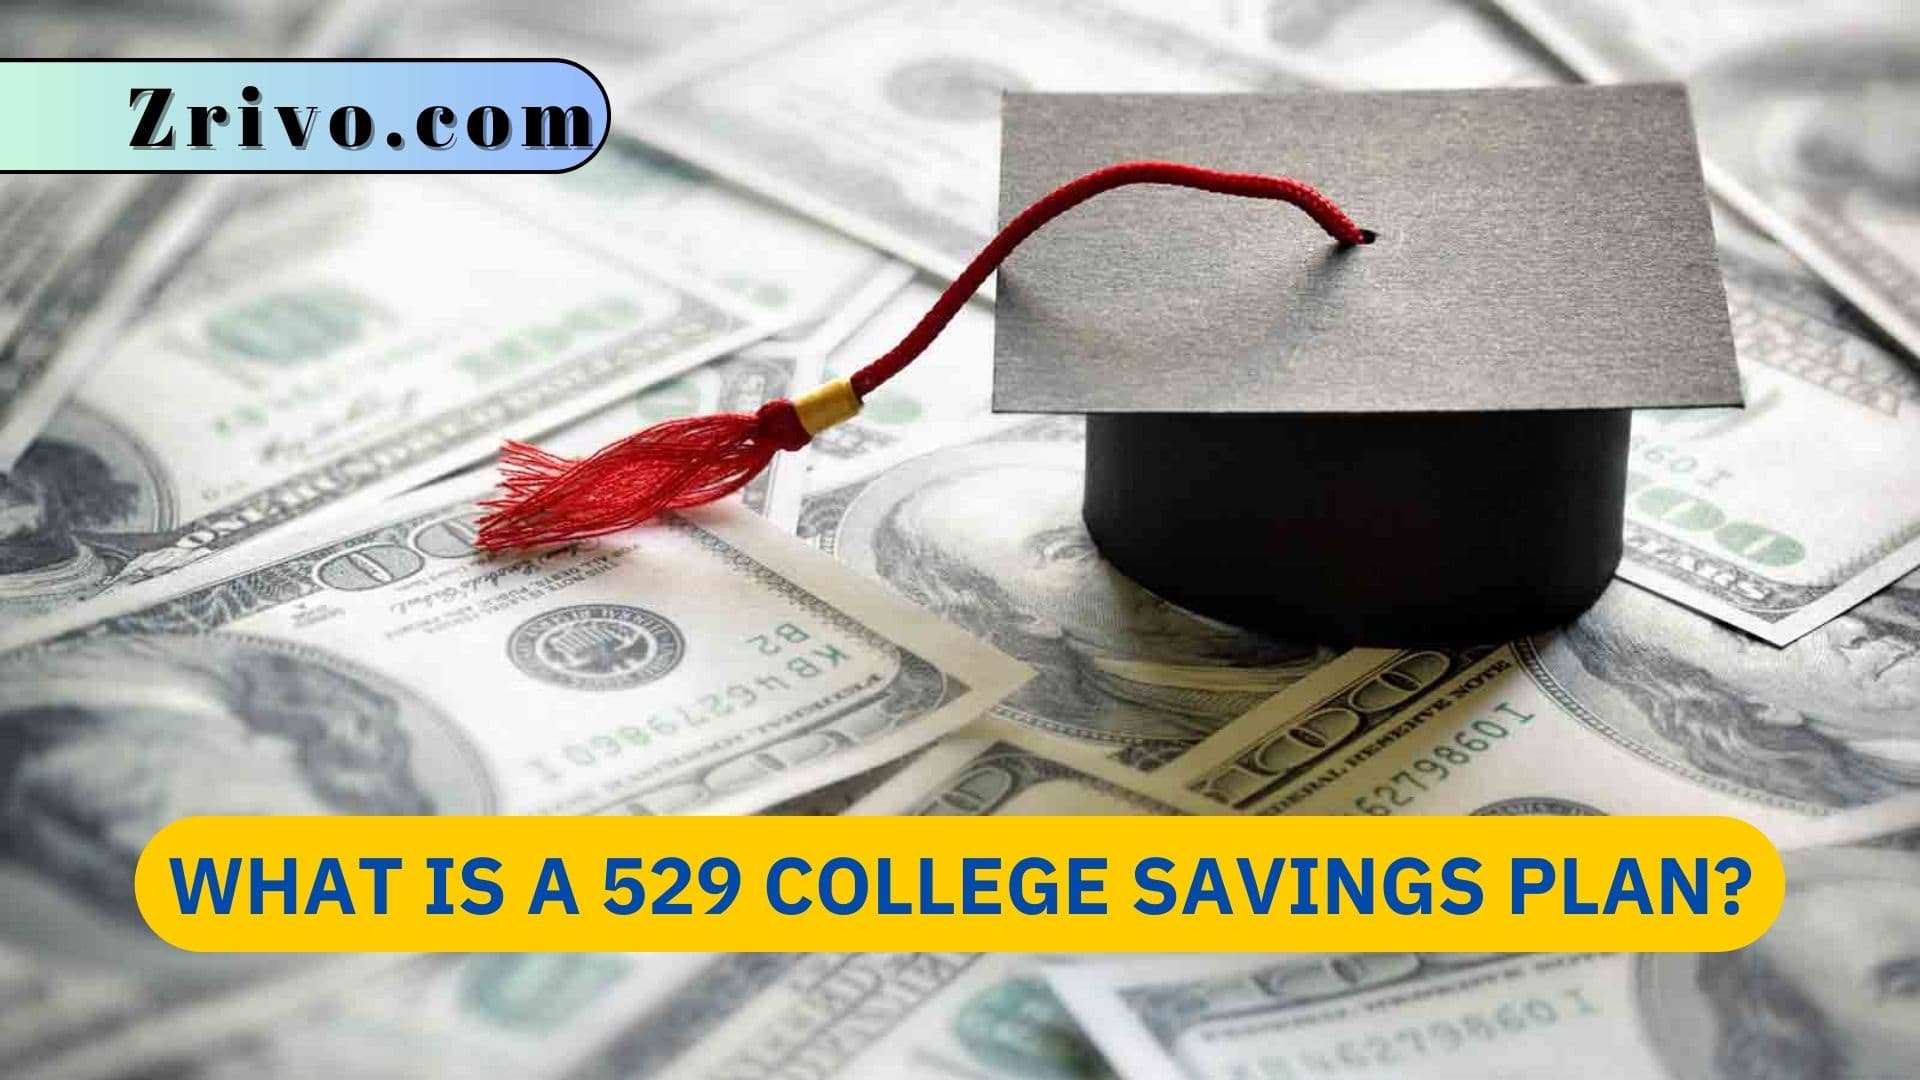 What is a 529 College Savings Plan